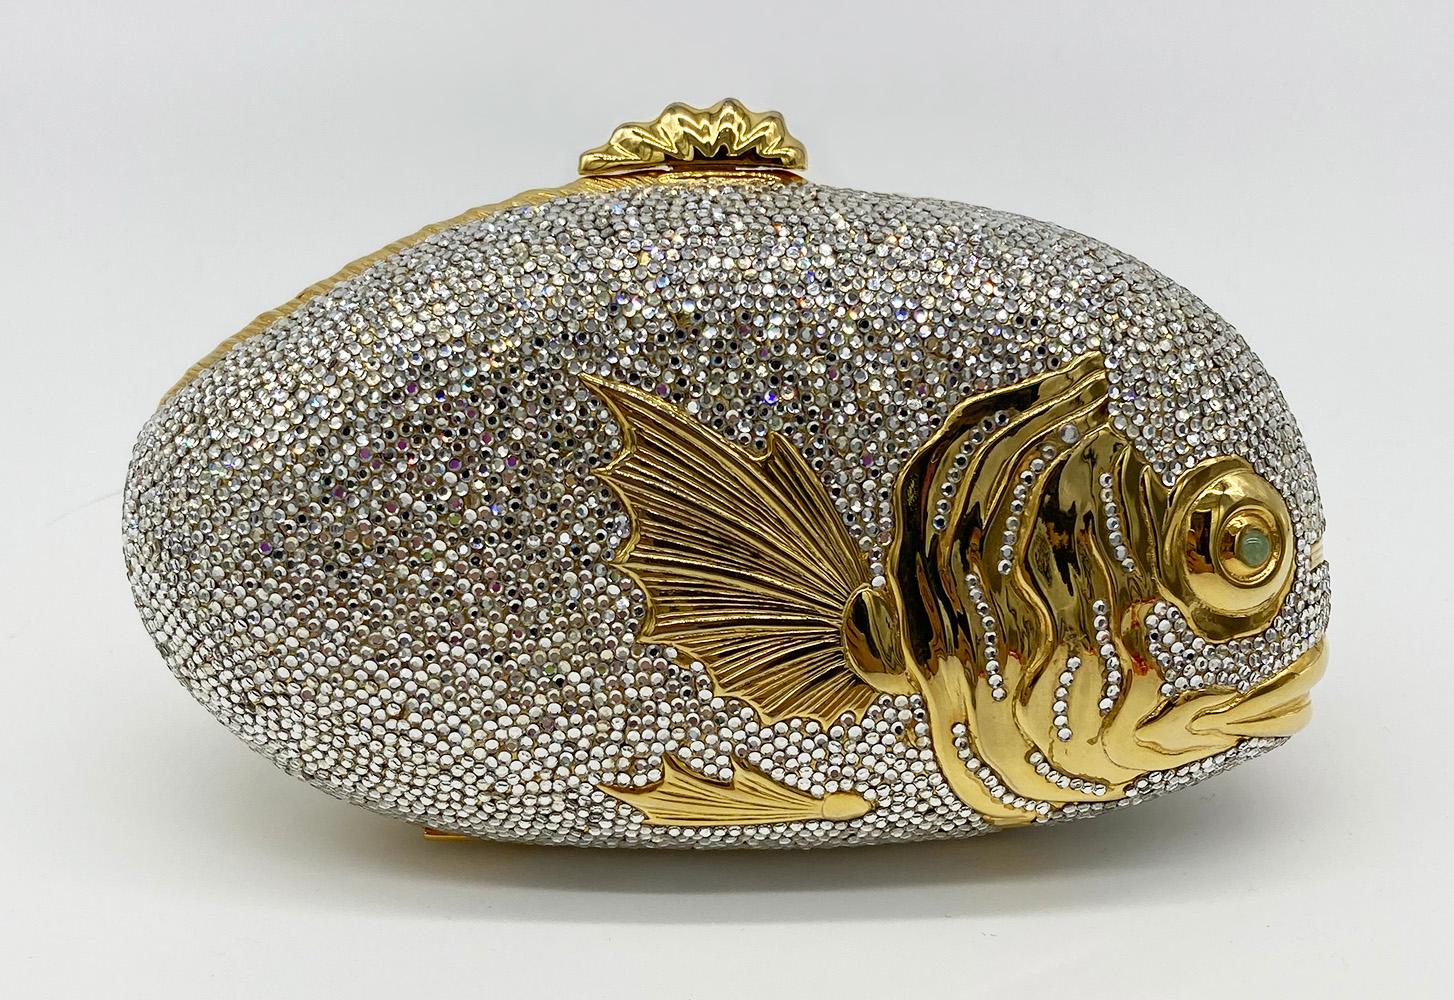 Judith Leiber Swarovski Crystal Fish Minaudiere in very good condition. Unique fish shape minaudiere covered in clear swarovski crystals with gold metal body. Jade green cabochon eyes. Top sliding latch closure opens to a gold leather interior with